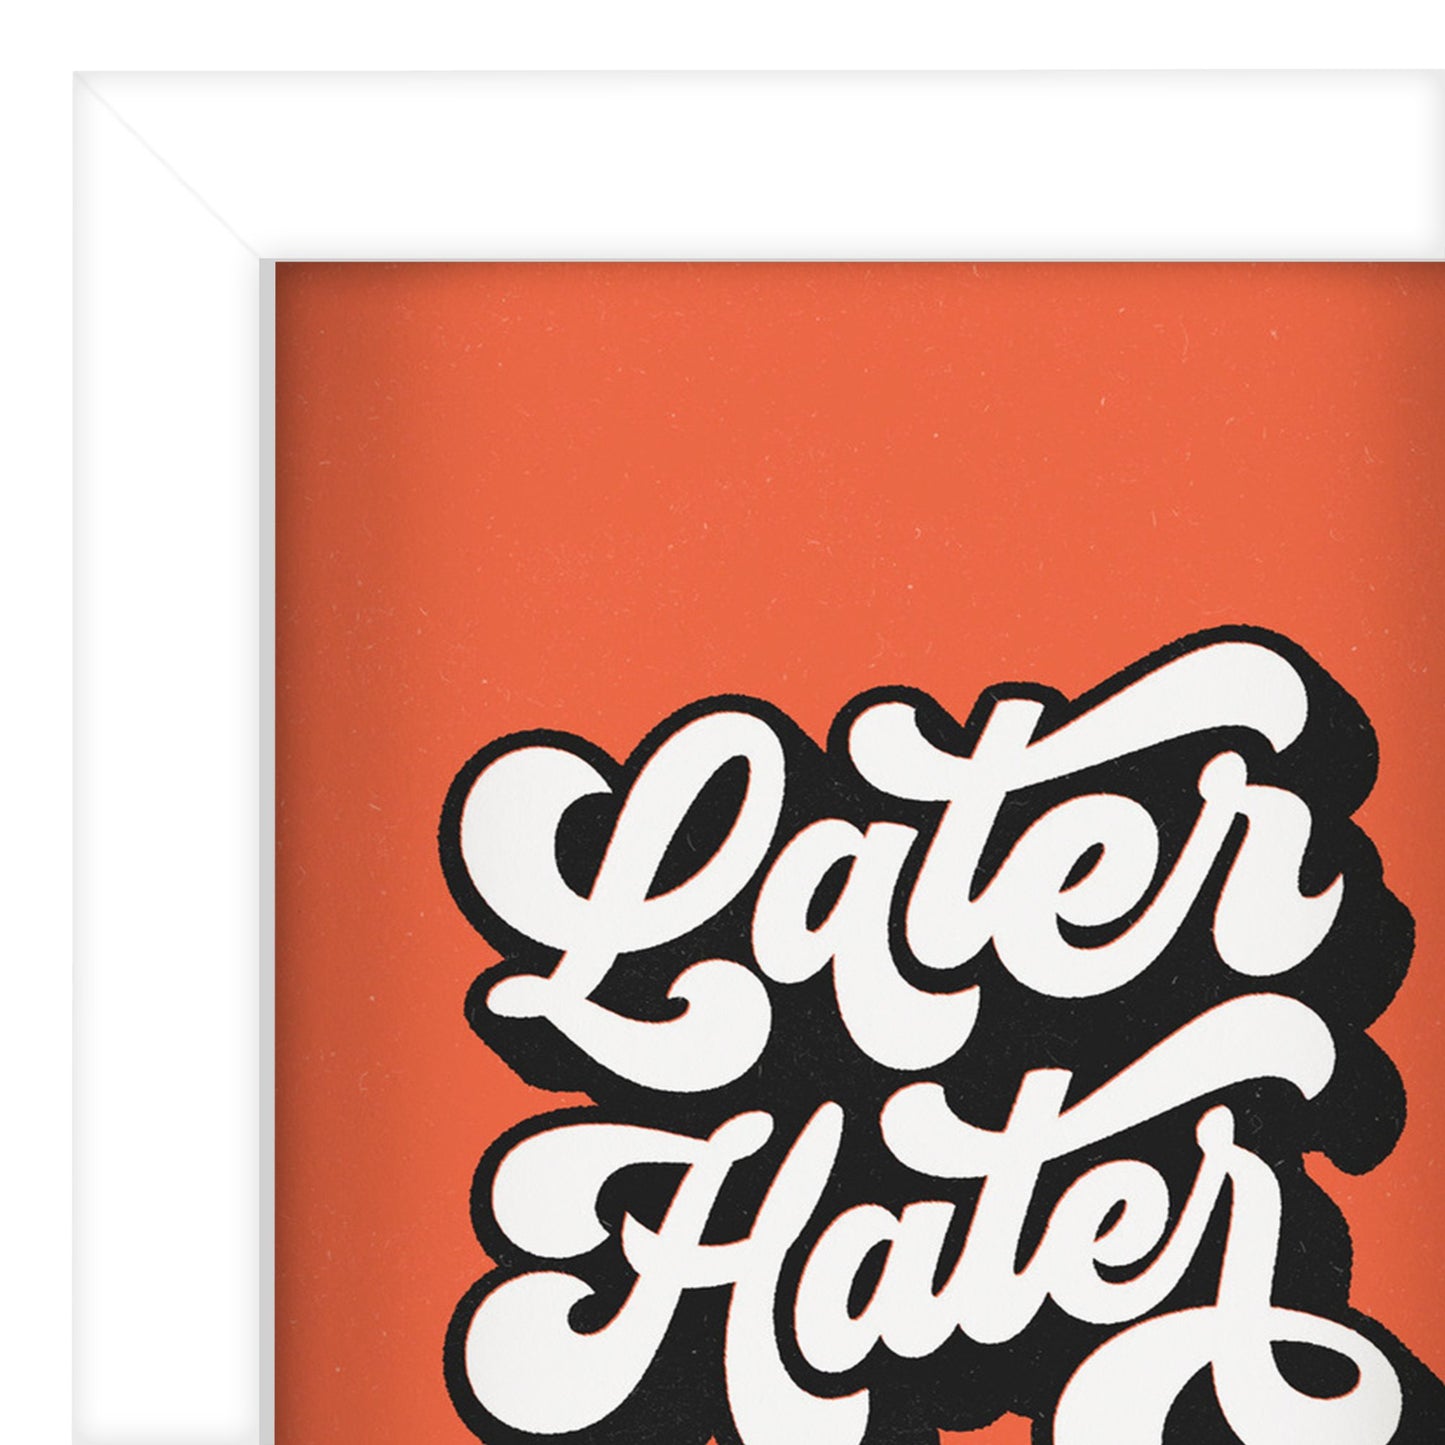 Later Hater By Motivated Type - Shadow Box Framed Art - Americanflat